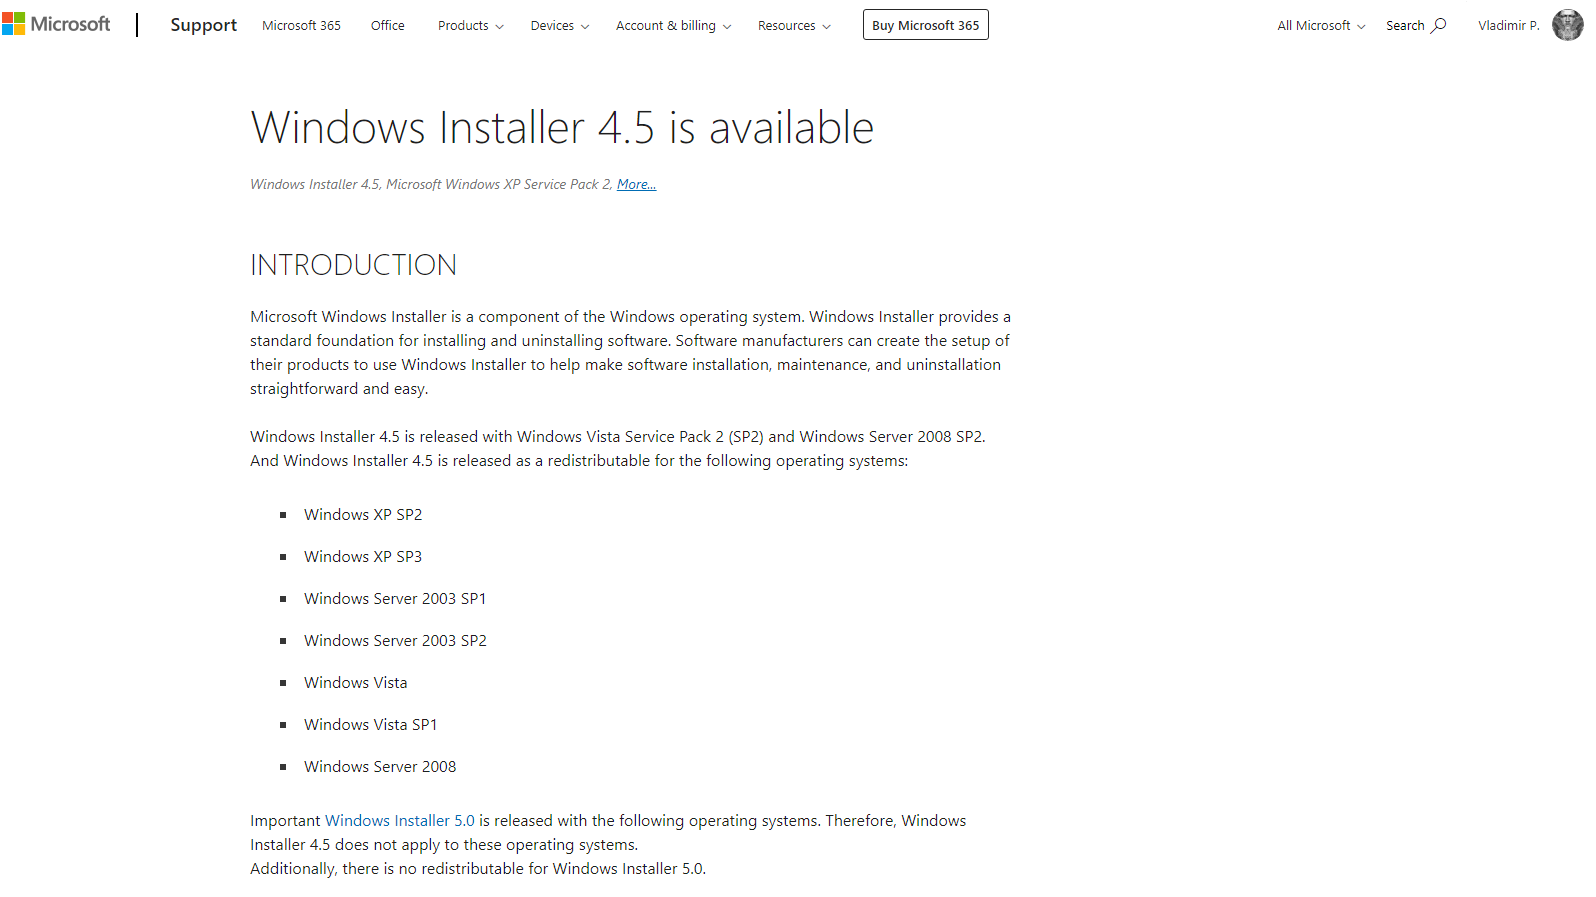 Official Microsoft download page for Windows Installer